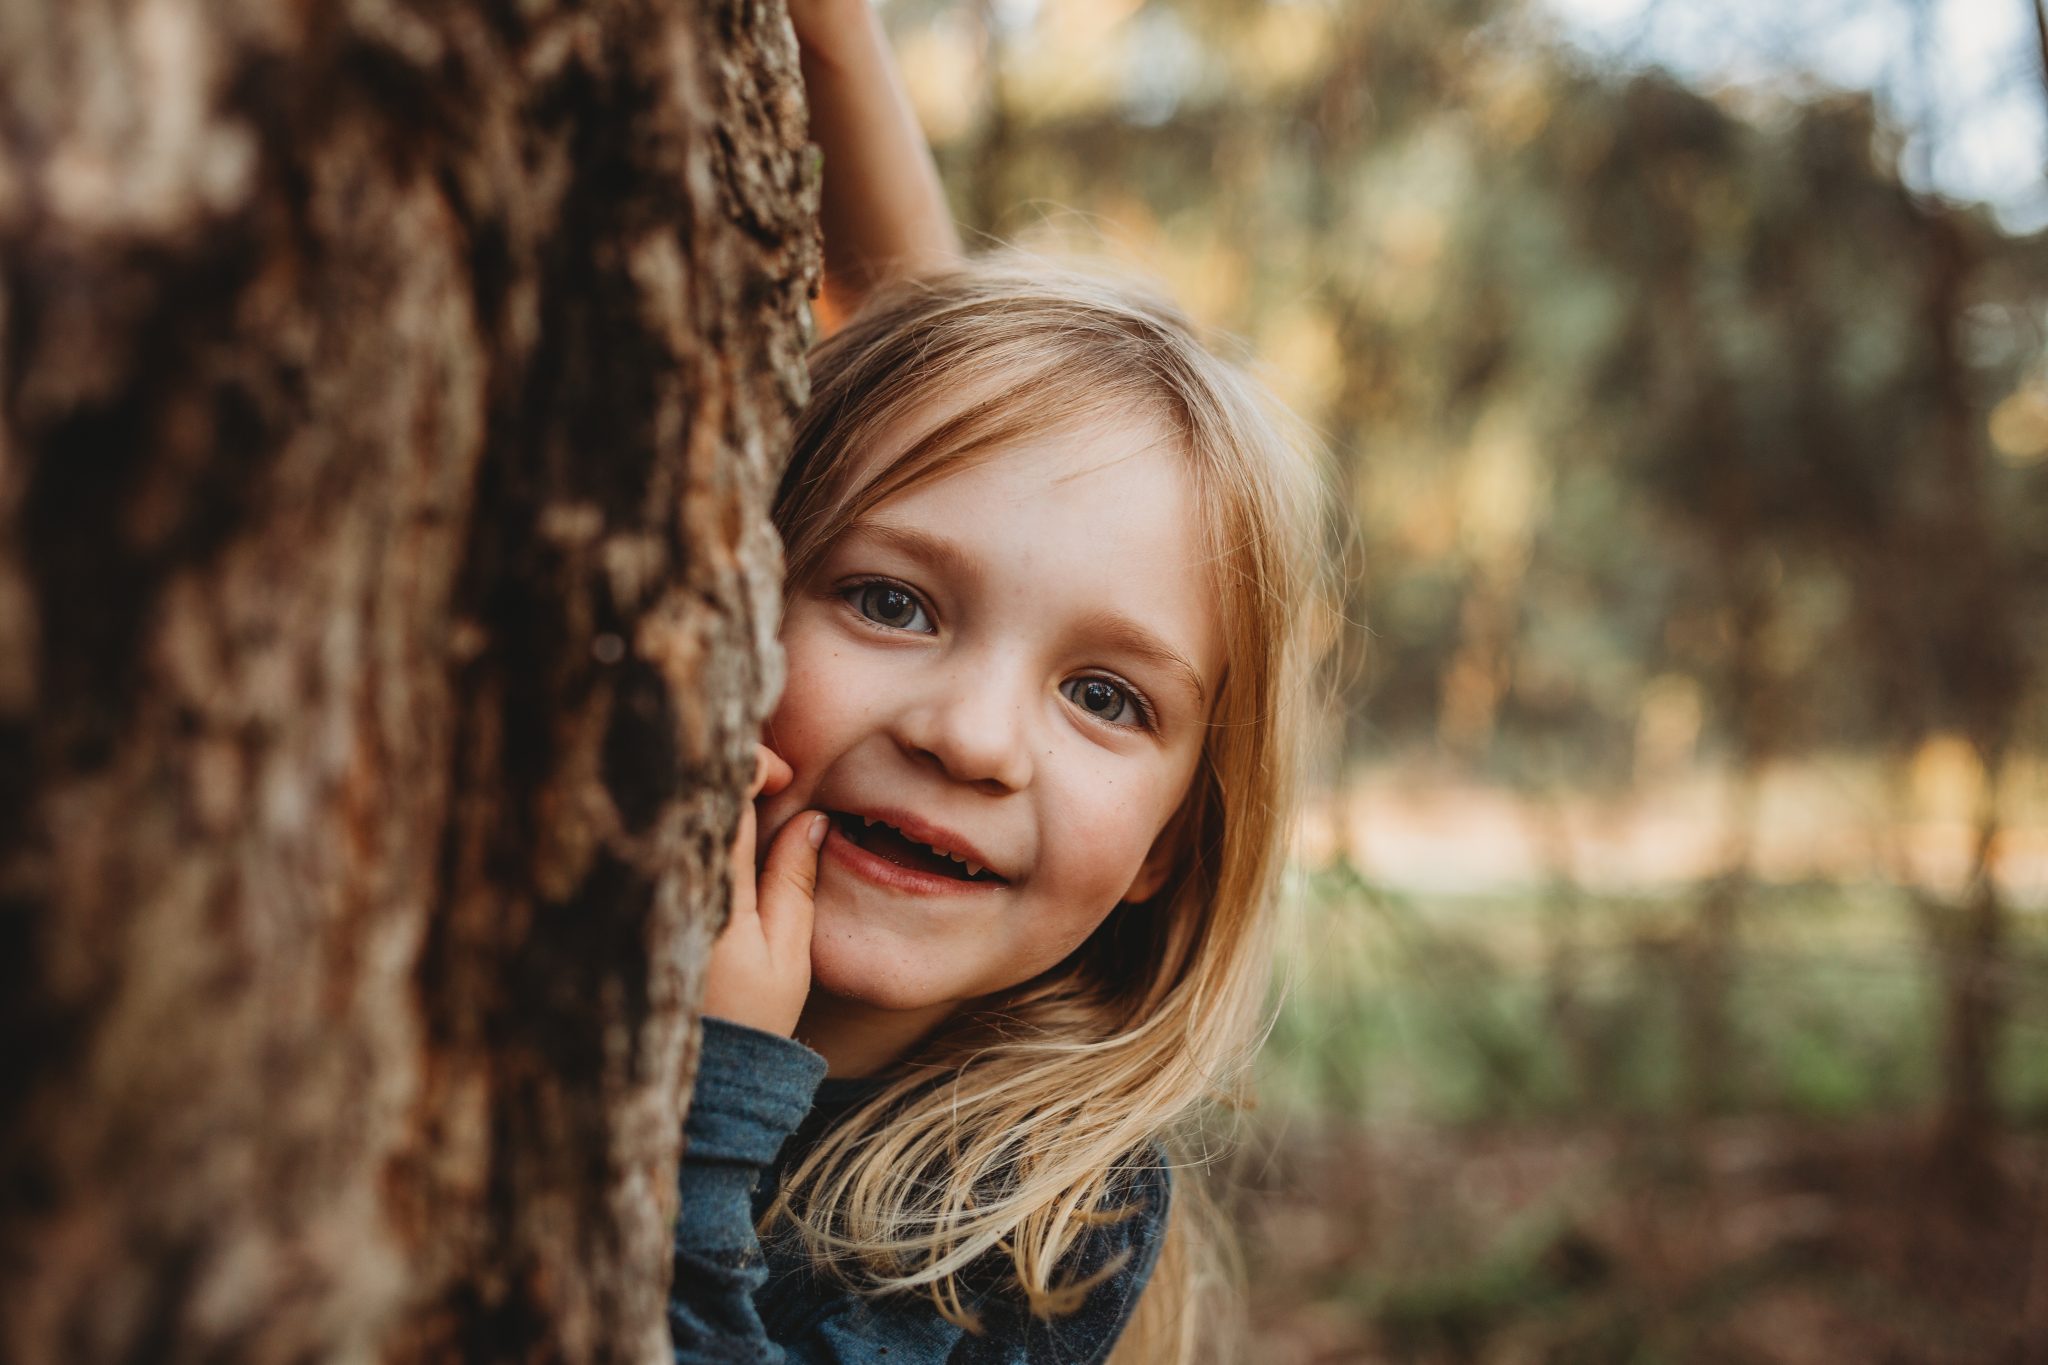 Young girl smiles while peeking out from behind a tree